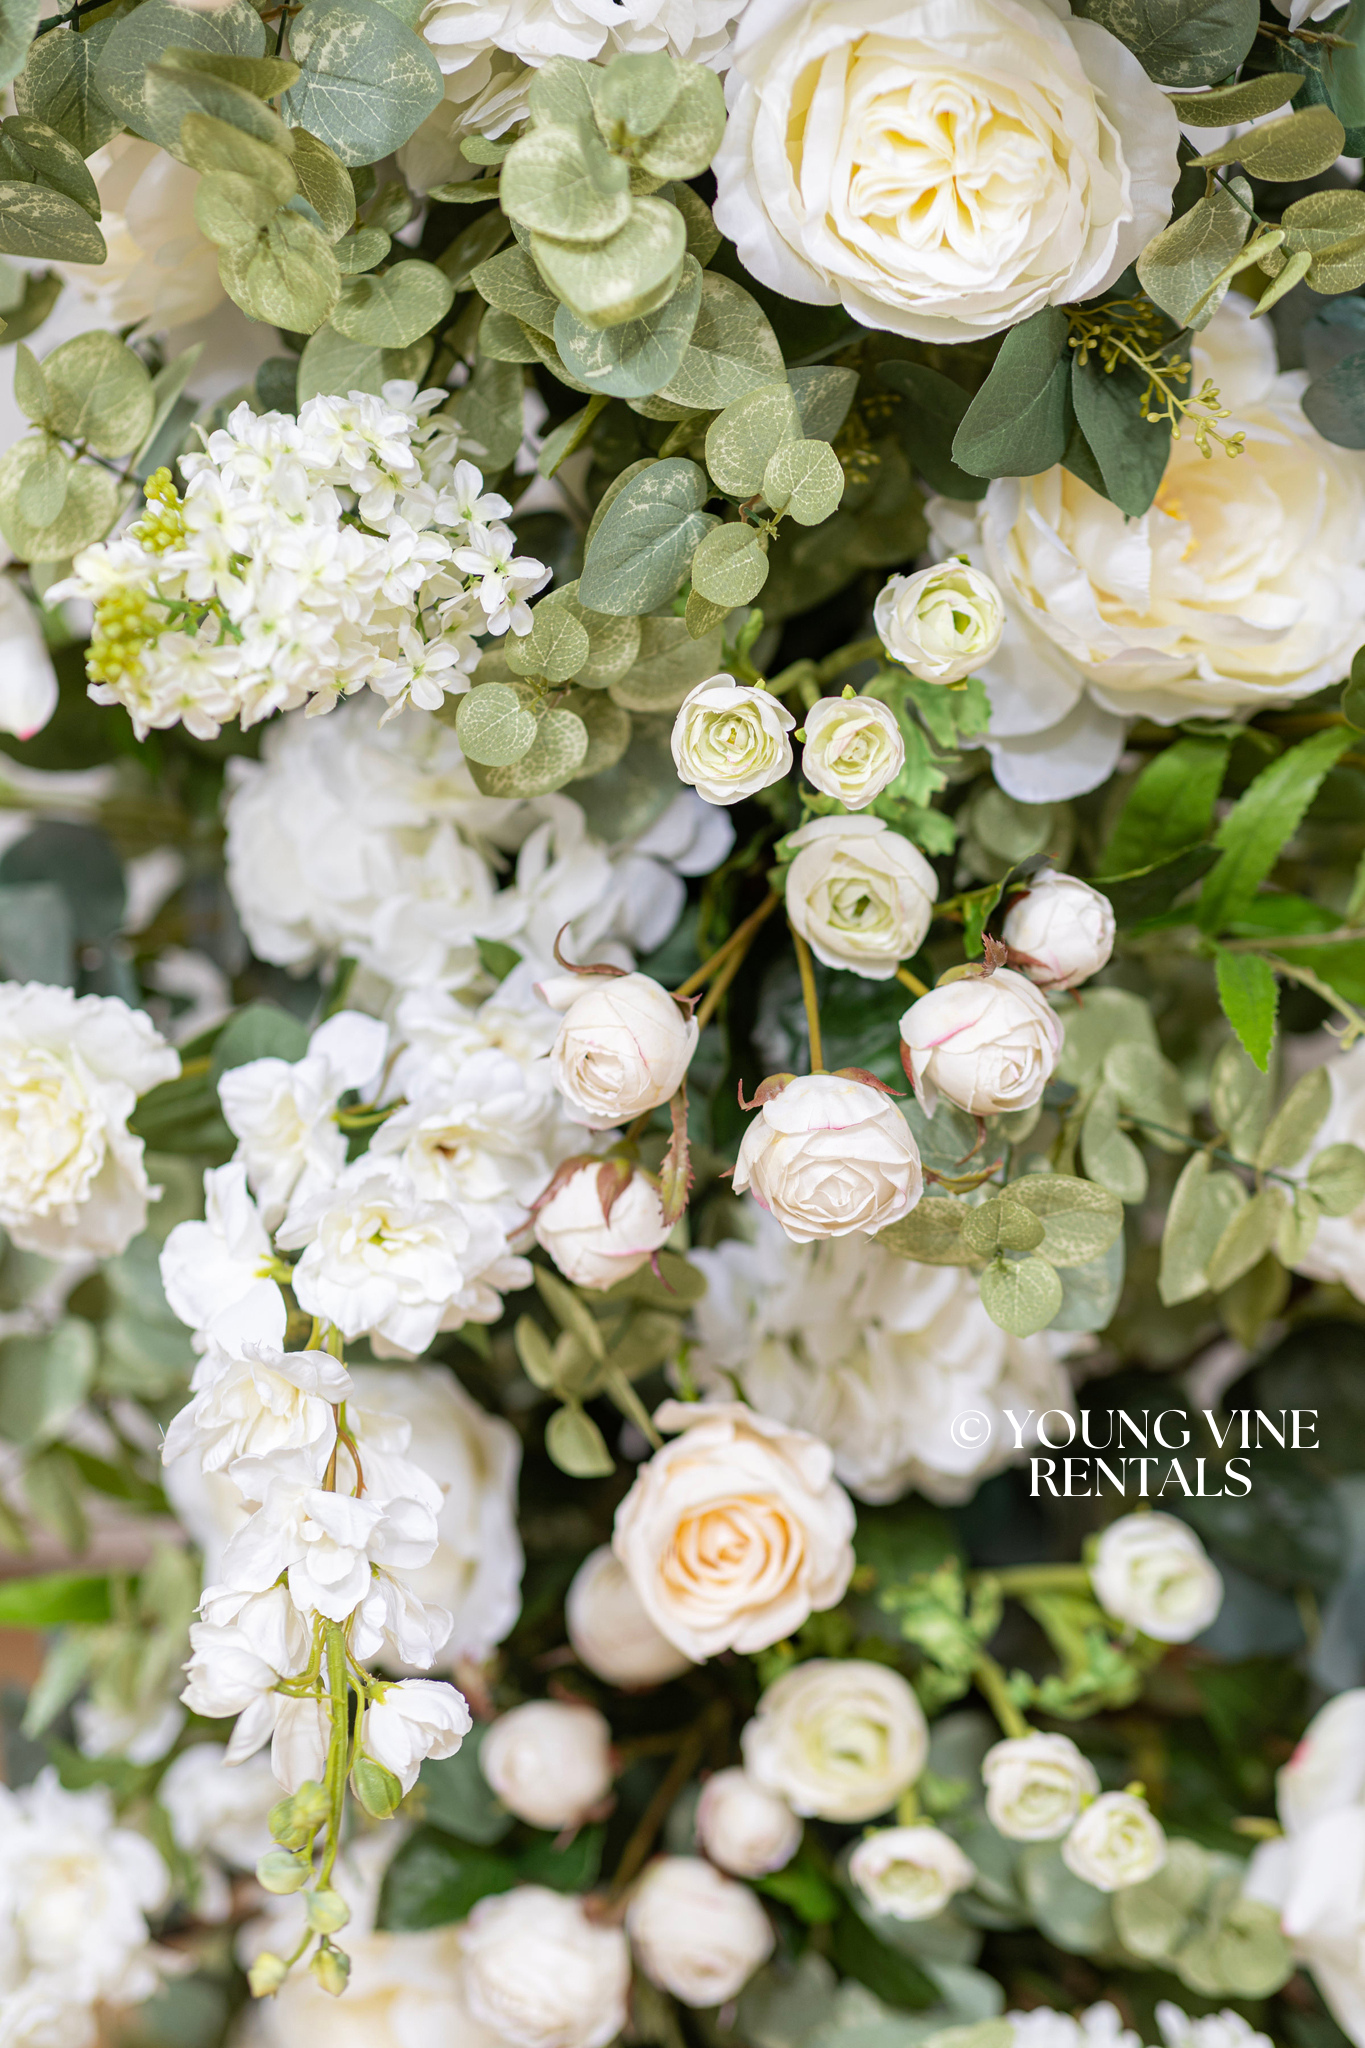 Close-up detail shot of lush, romantic wedding floral arbor studded with an abundance of ivory and white flowers and various types of eucalyptus foliage, with a very delicate and textural overall look.